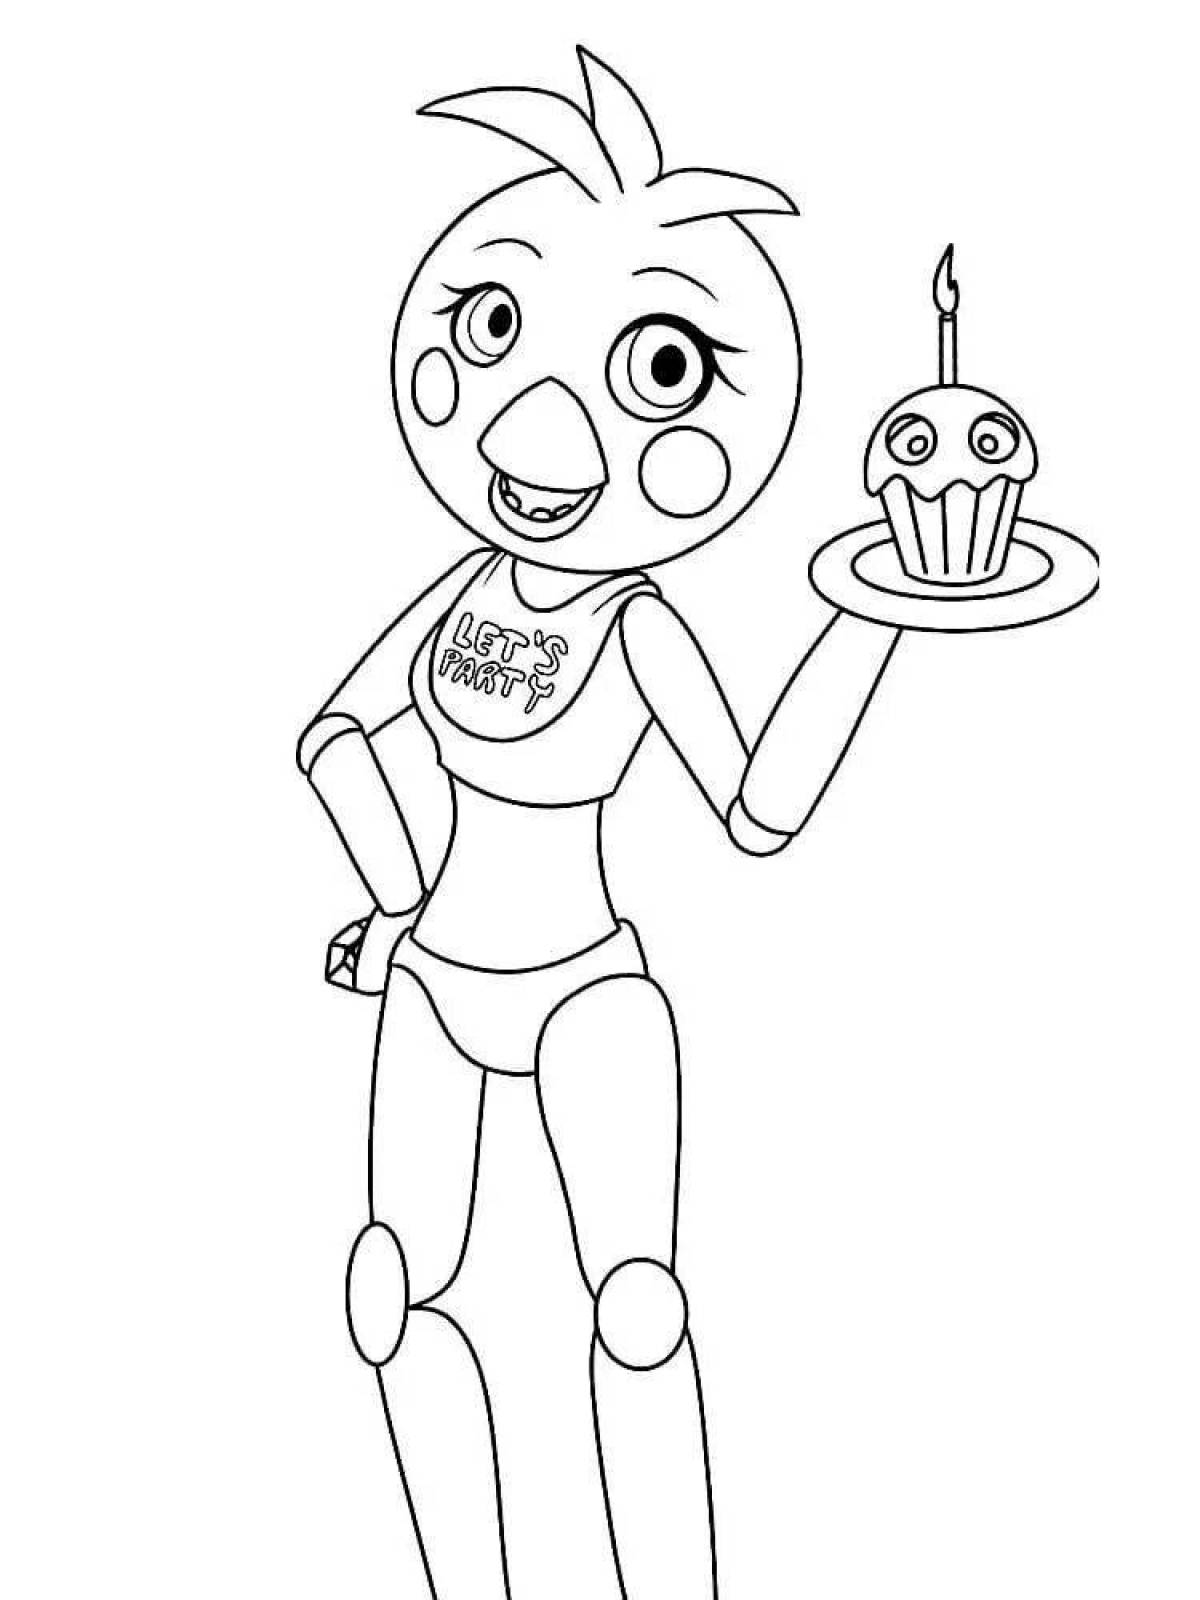 Chica's colorful fnaf 9 coloring page